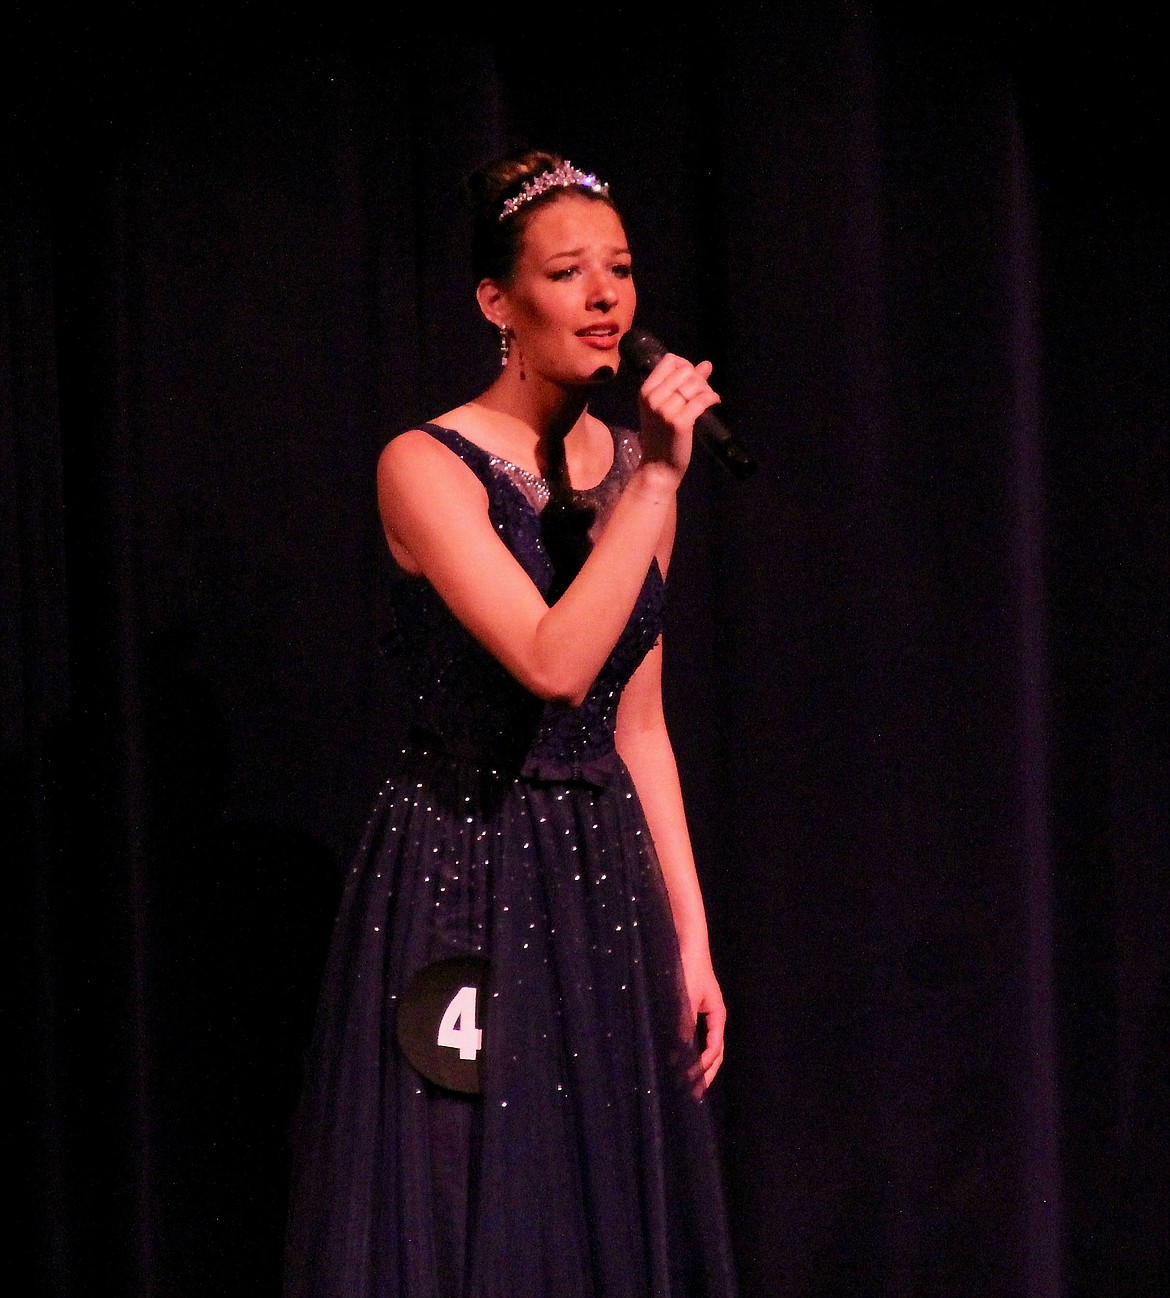 Margaret Weaver sings during the talent portion of the DYW 2022 program.